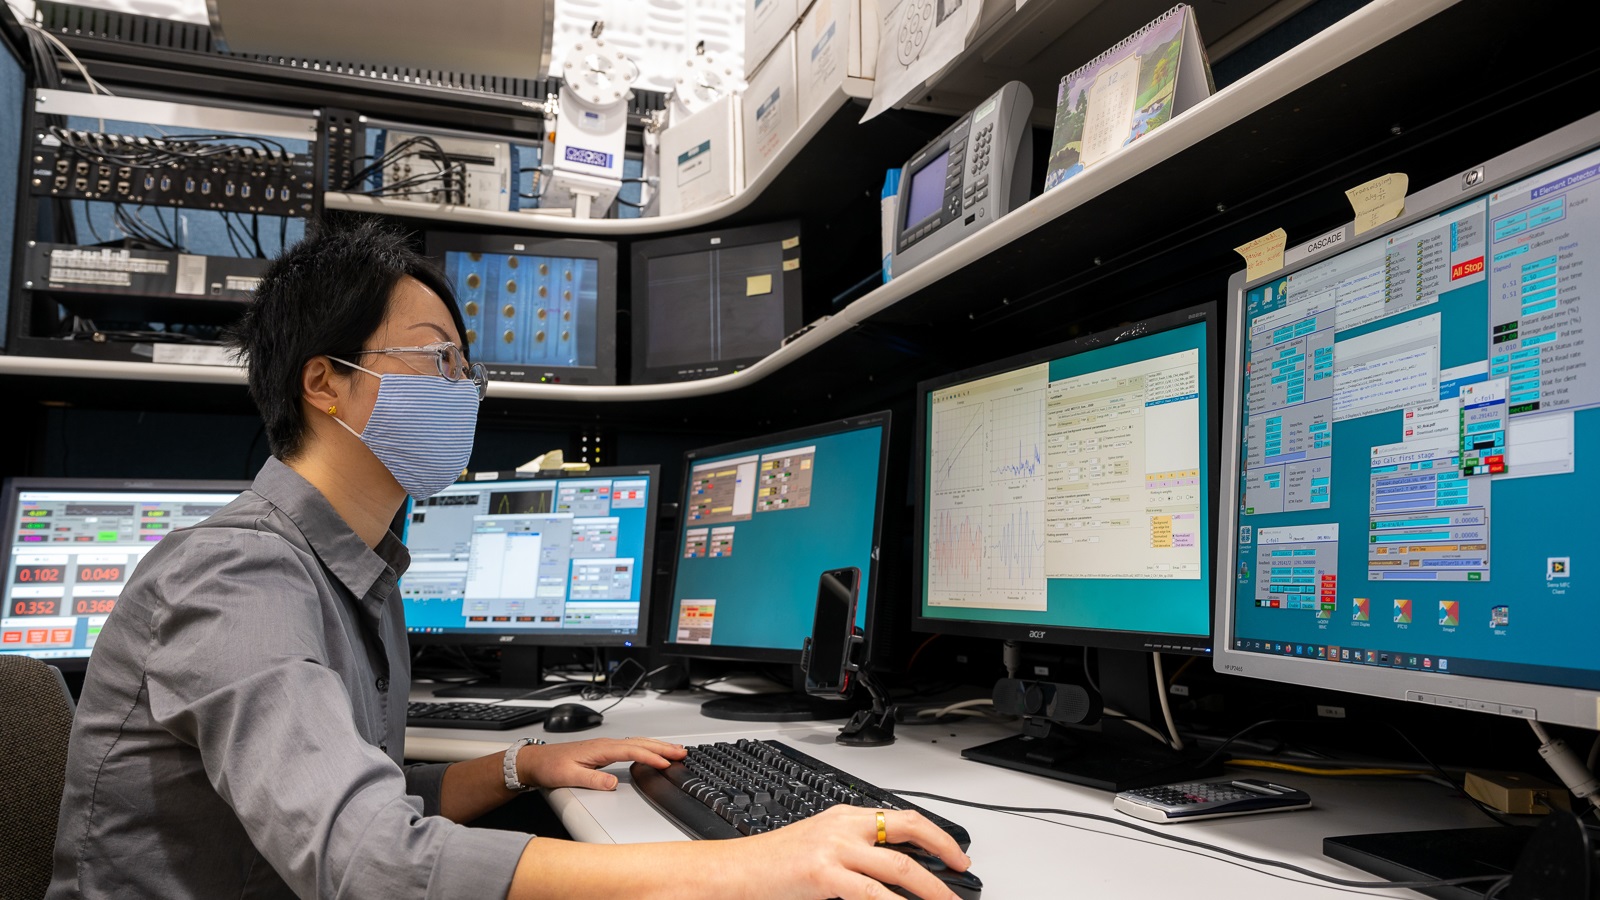 Beamline scientist Tianpin Wu in the control room of beamline 9-BM of the Advanced Photon Source. This beamline is one of the few capable of in situ experiments, and Wu helps visiting scientists design their experiments and collect data. (Image by Mark Lopez / Argonne National Laboratory.)